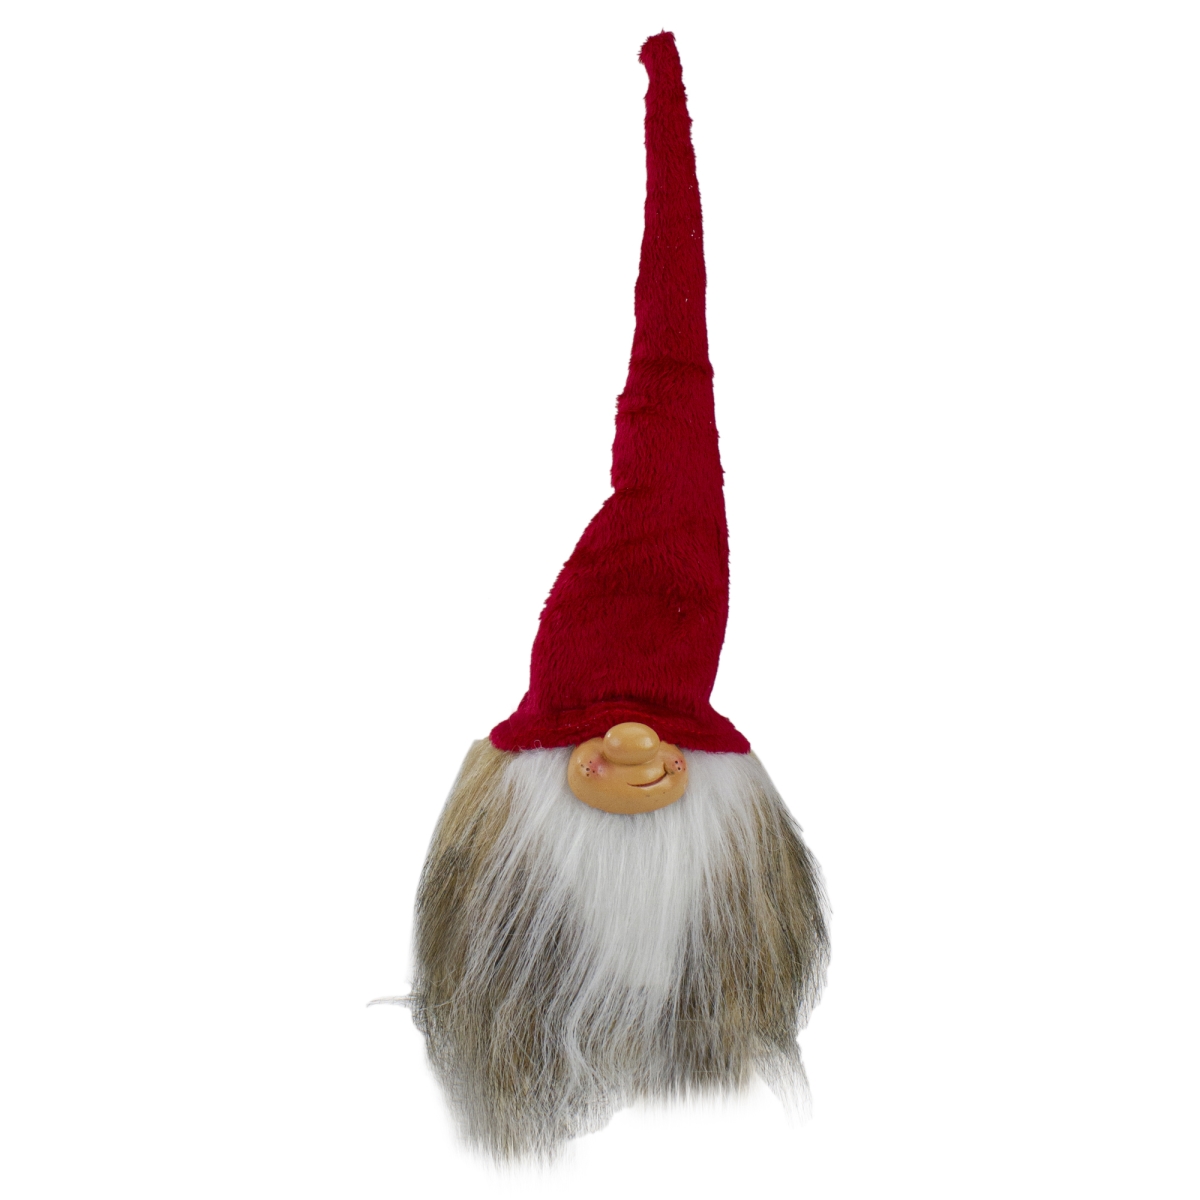 UPC 195583165243 product image for 34168734 11 in. Christmas Gnome with Long Beard, Red & White | upcitemdb.com